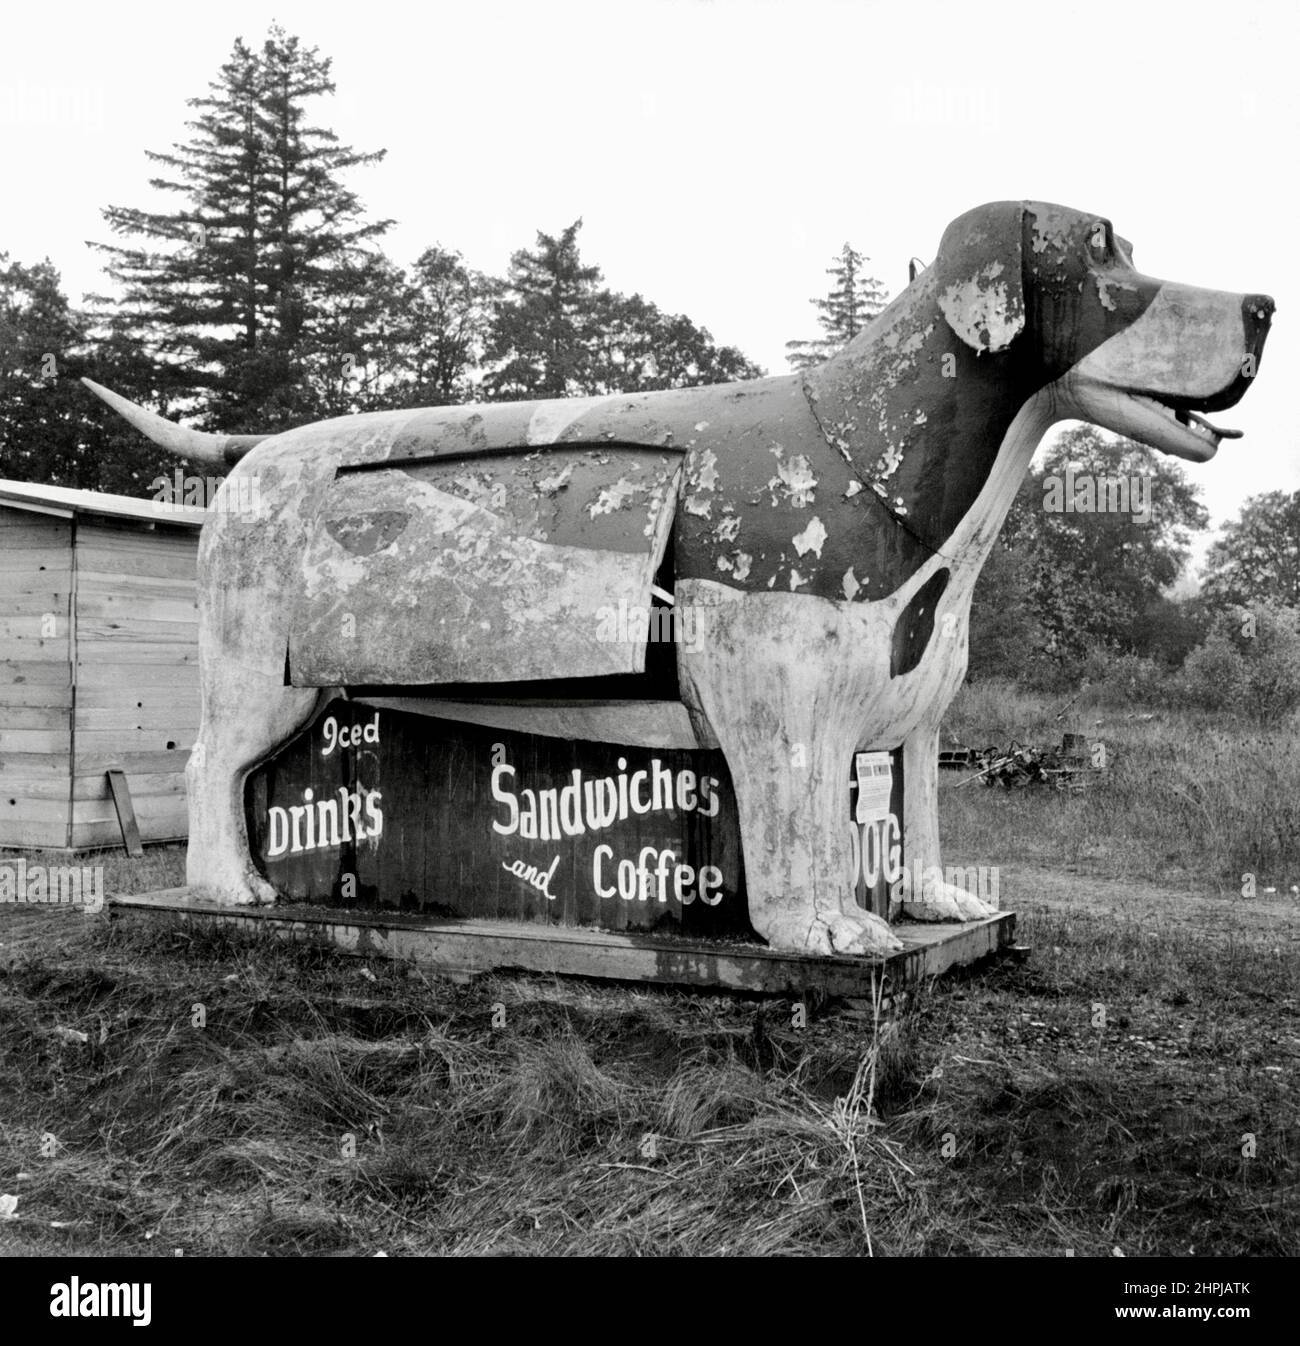 Dorothea Lange - Novelty building shaped like giant dog. "On U.S. Highway 99 as it continues through Williamette Valley, Oregon" Stock Photo